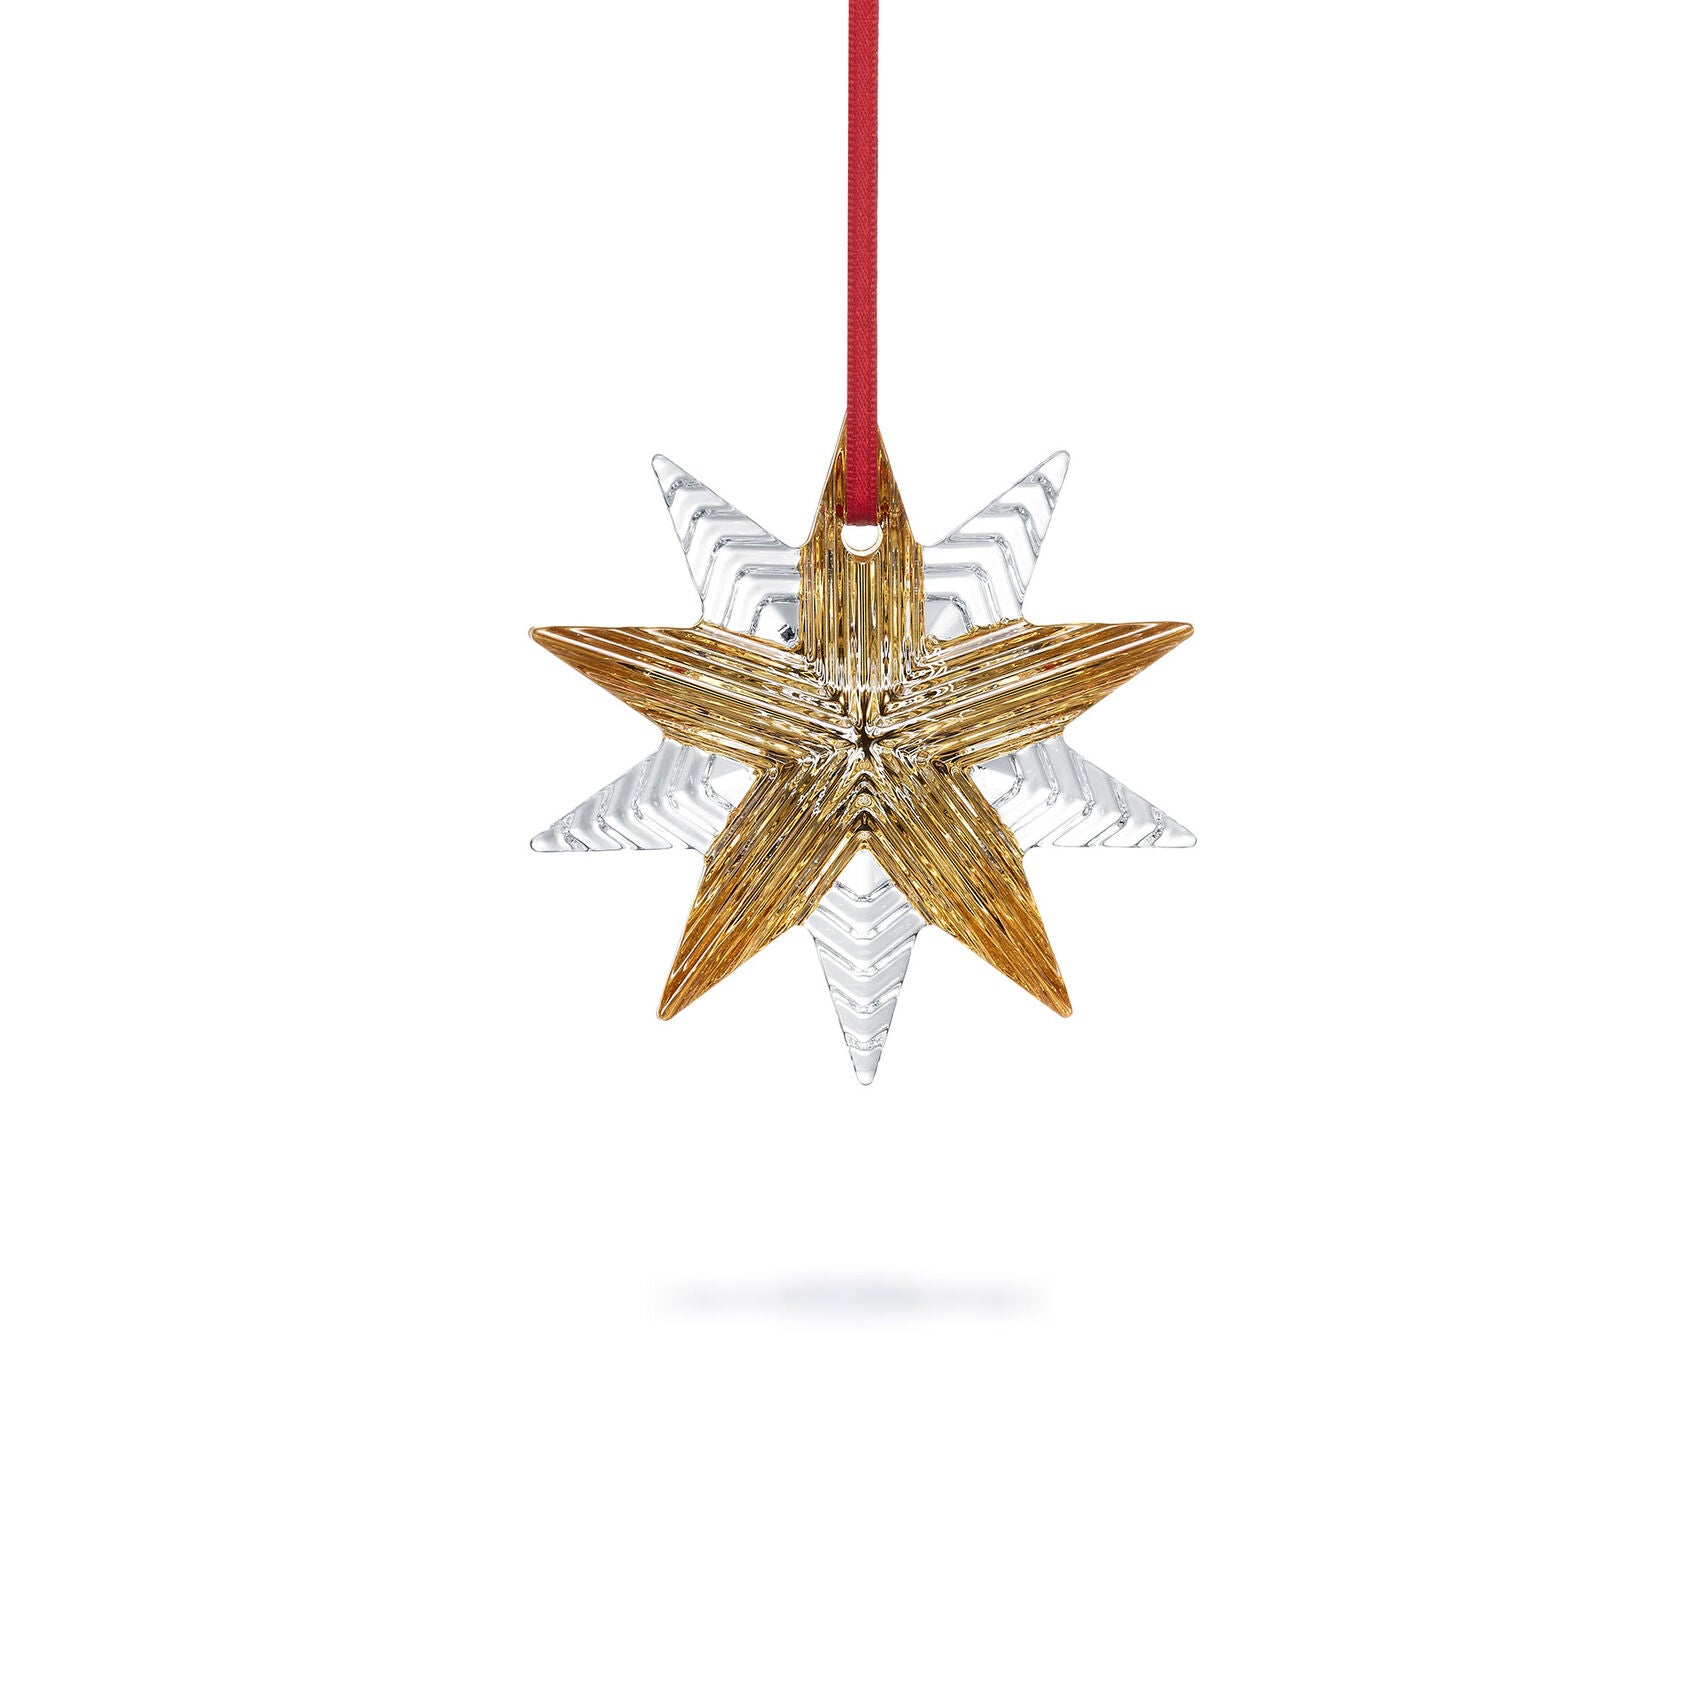 Baccarat 2021 Noel Annual Ornament with 20 carat gold